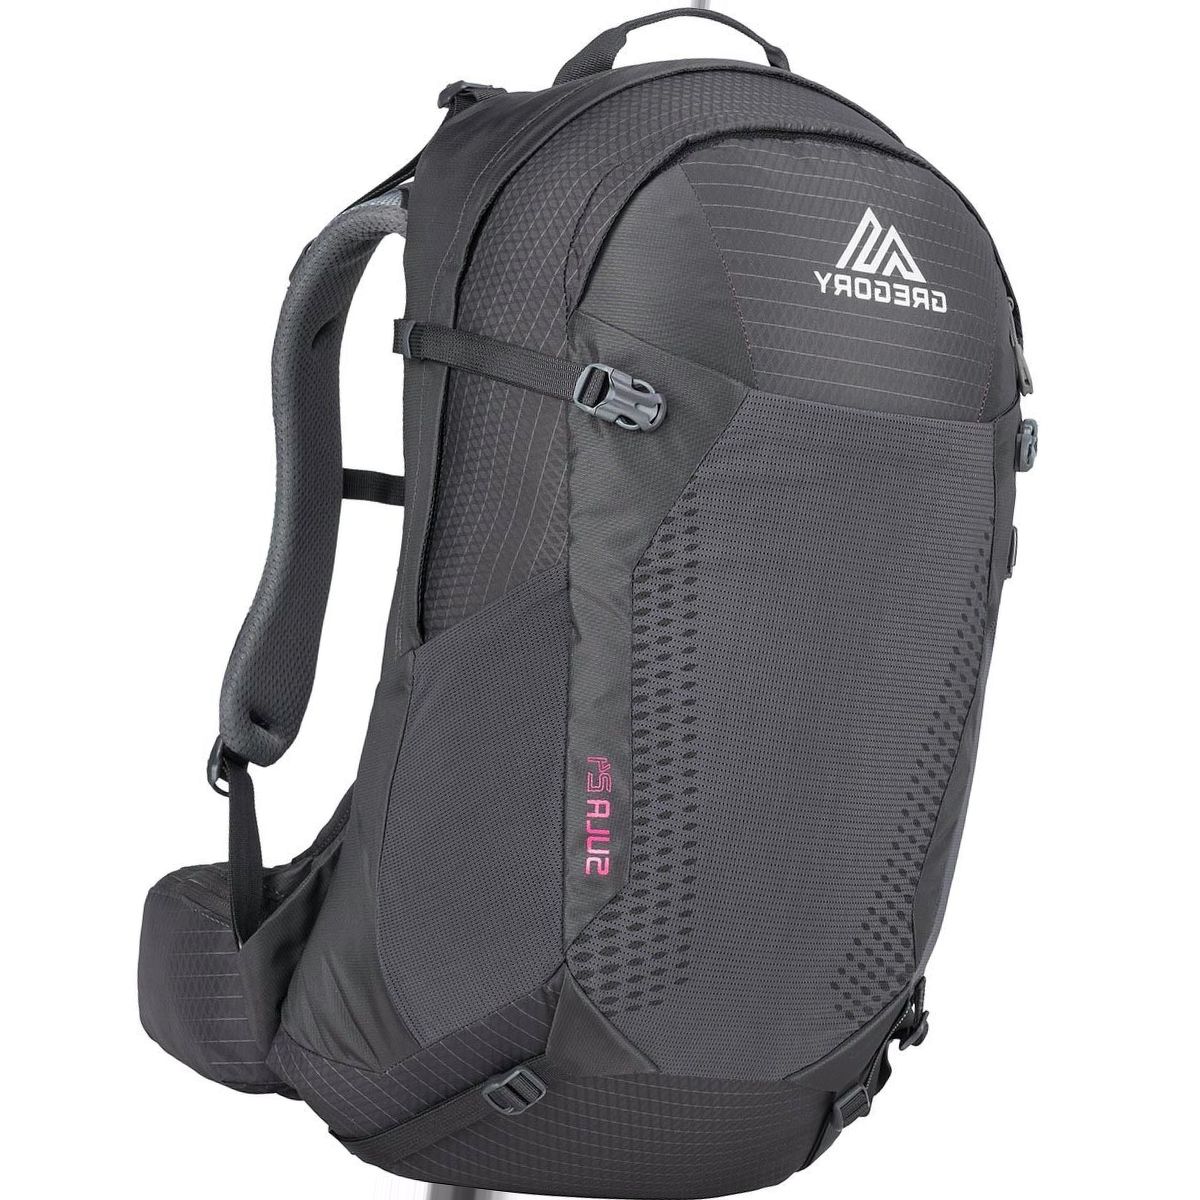 Gregory Sula 24L Backpack - Women's